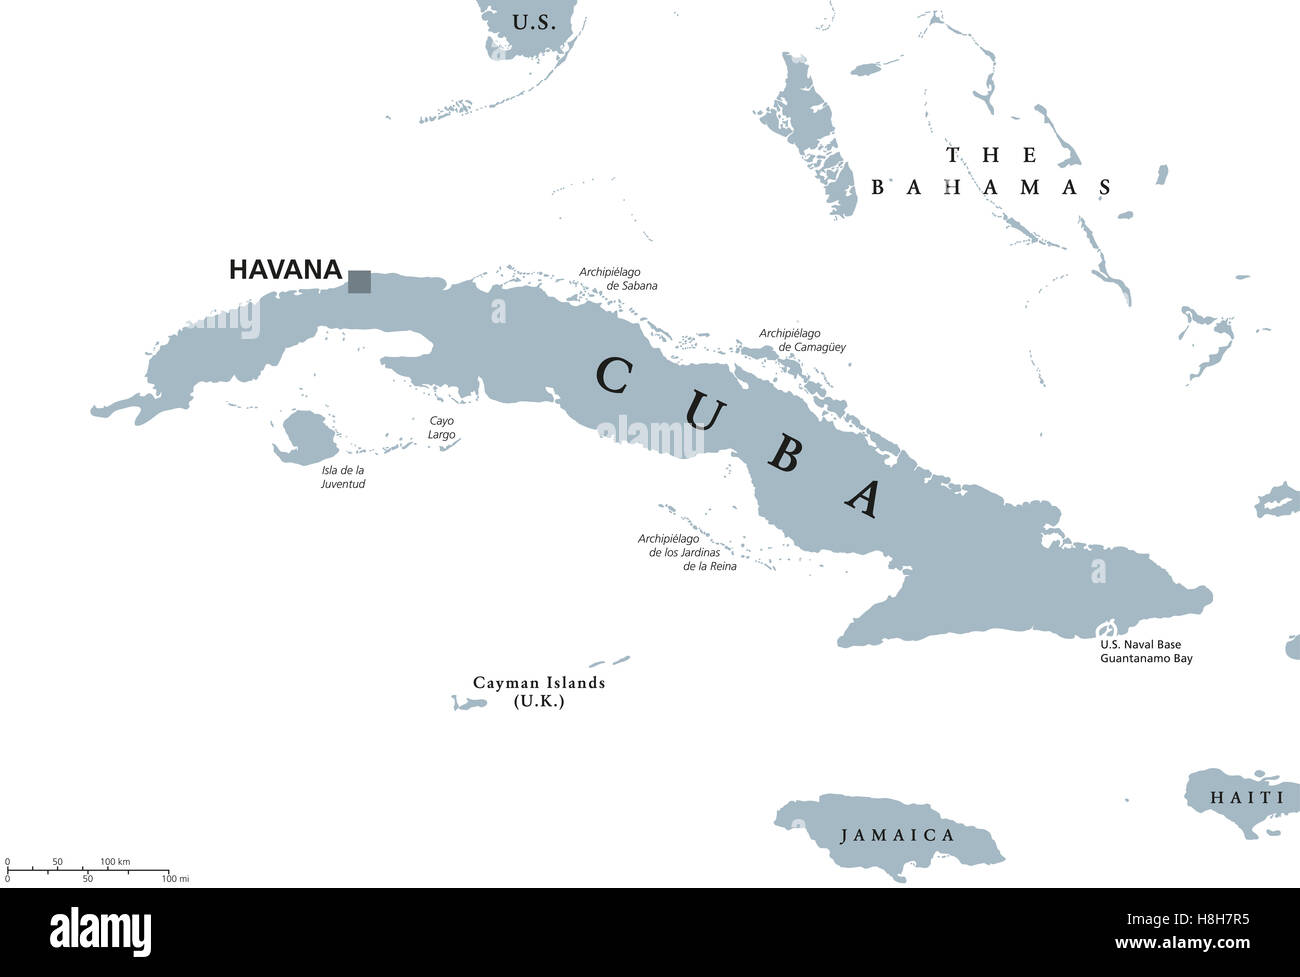 Cuba political map with capital Havana. Republic in the northern Caribbean with the neighbor countries Jamaica and Haiti. Stock Photo